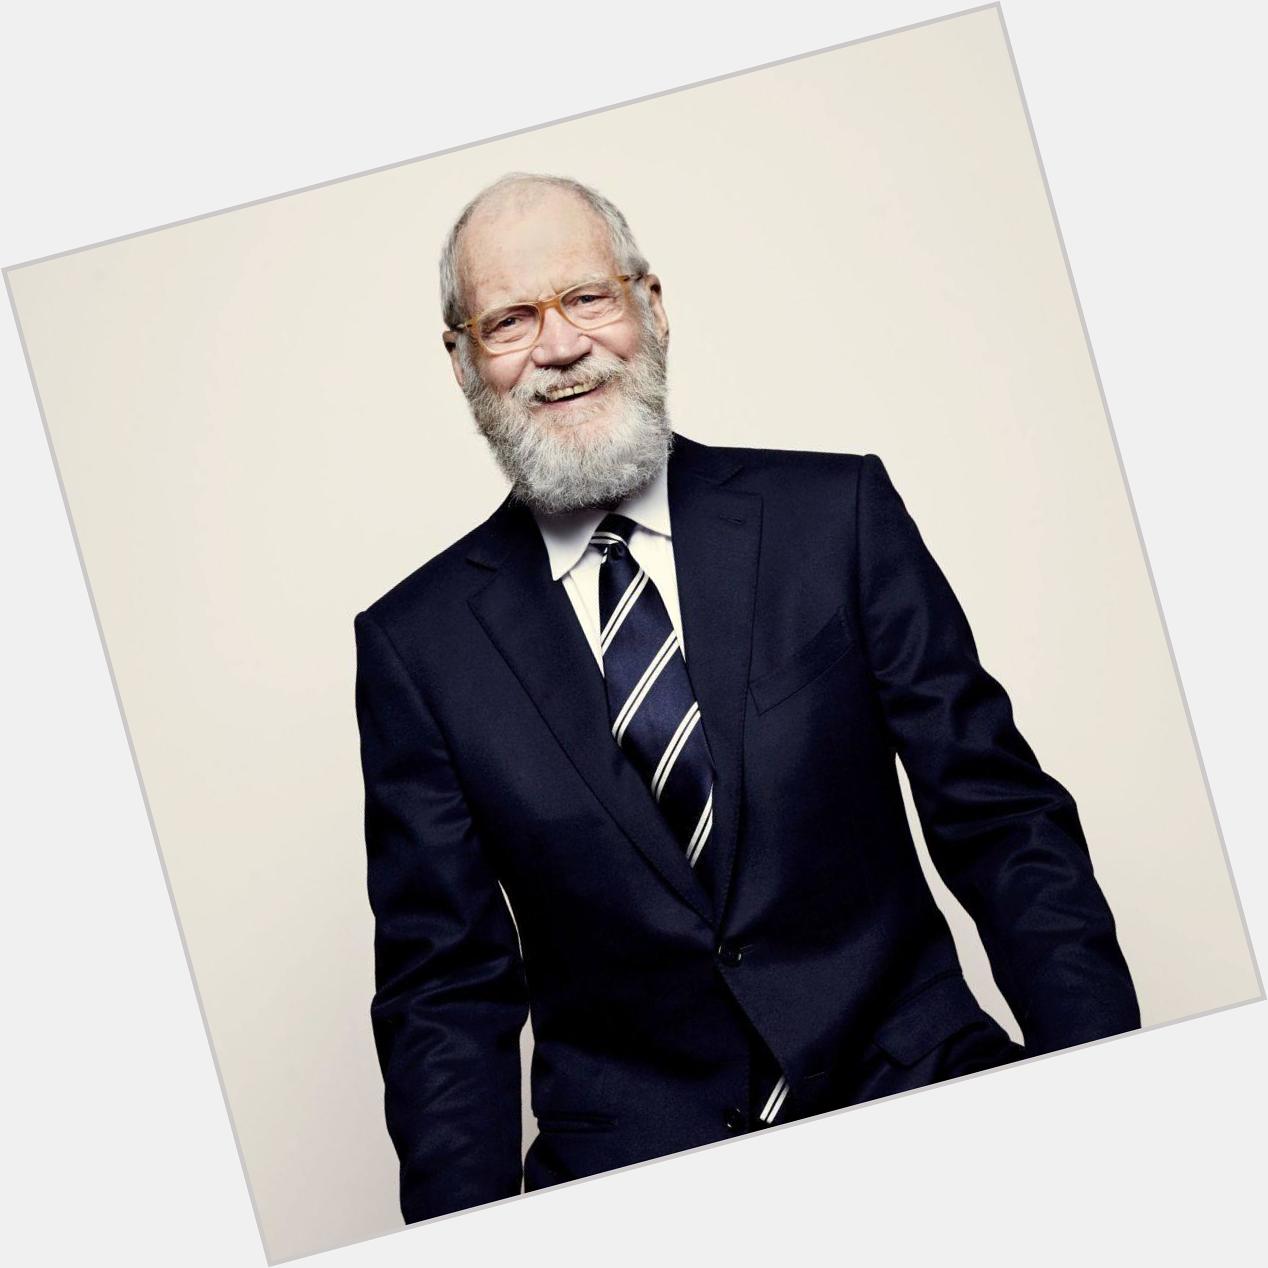 Happy Birthday to David Letterman who turns 72 today! 